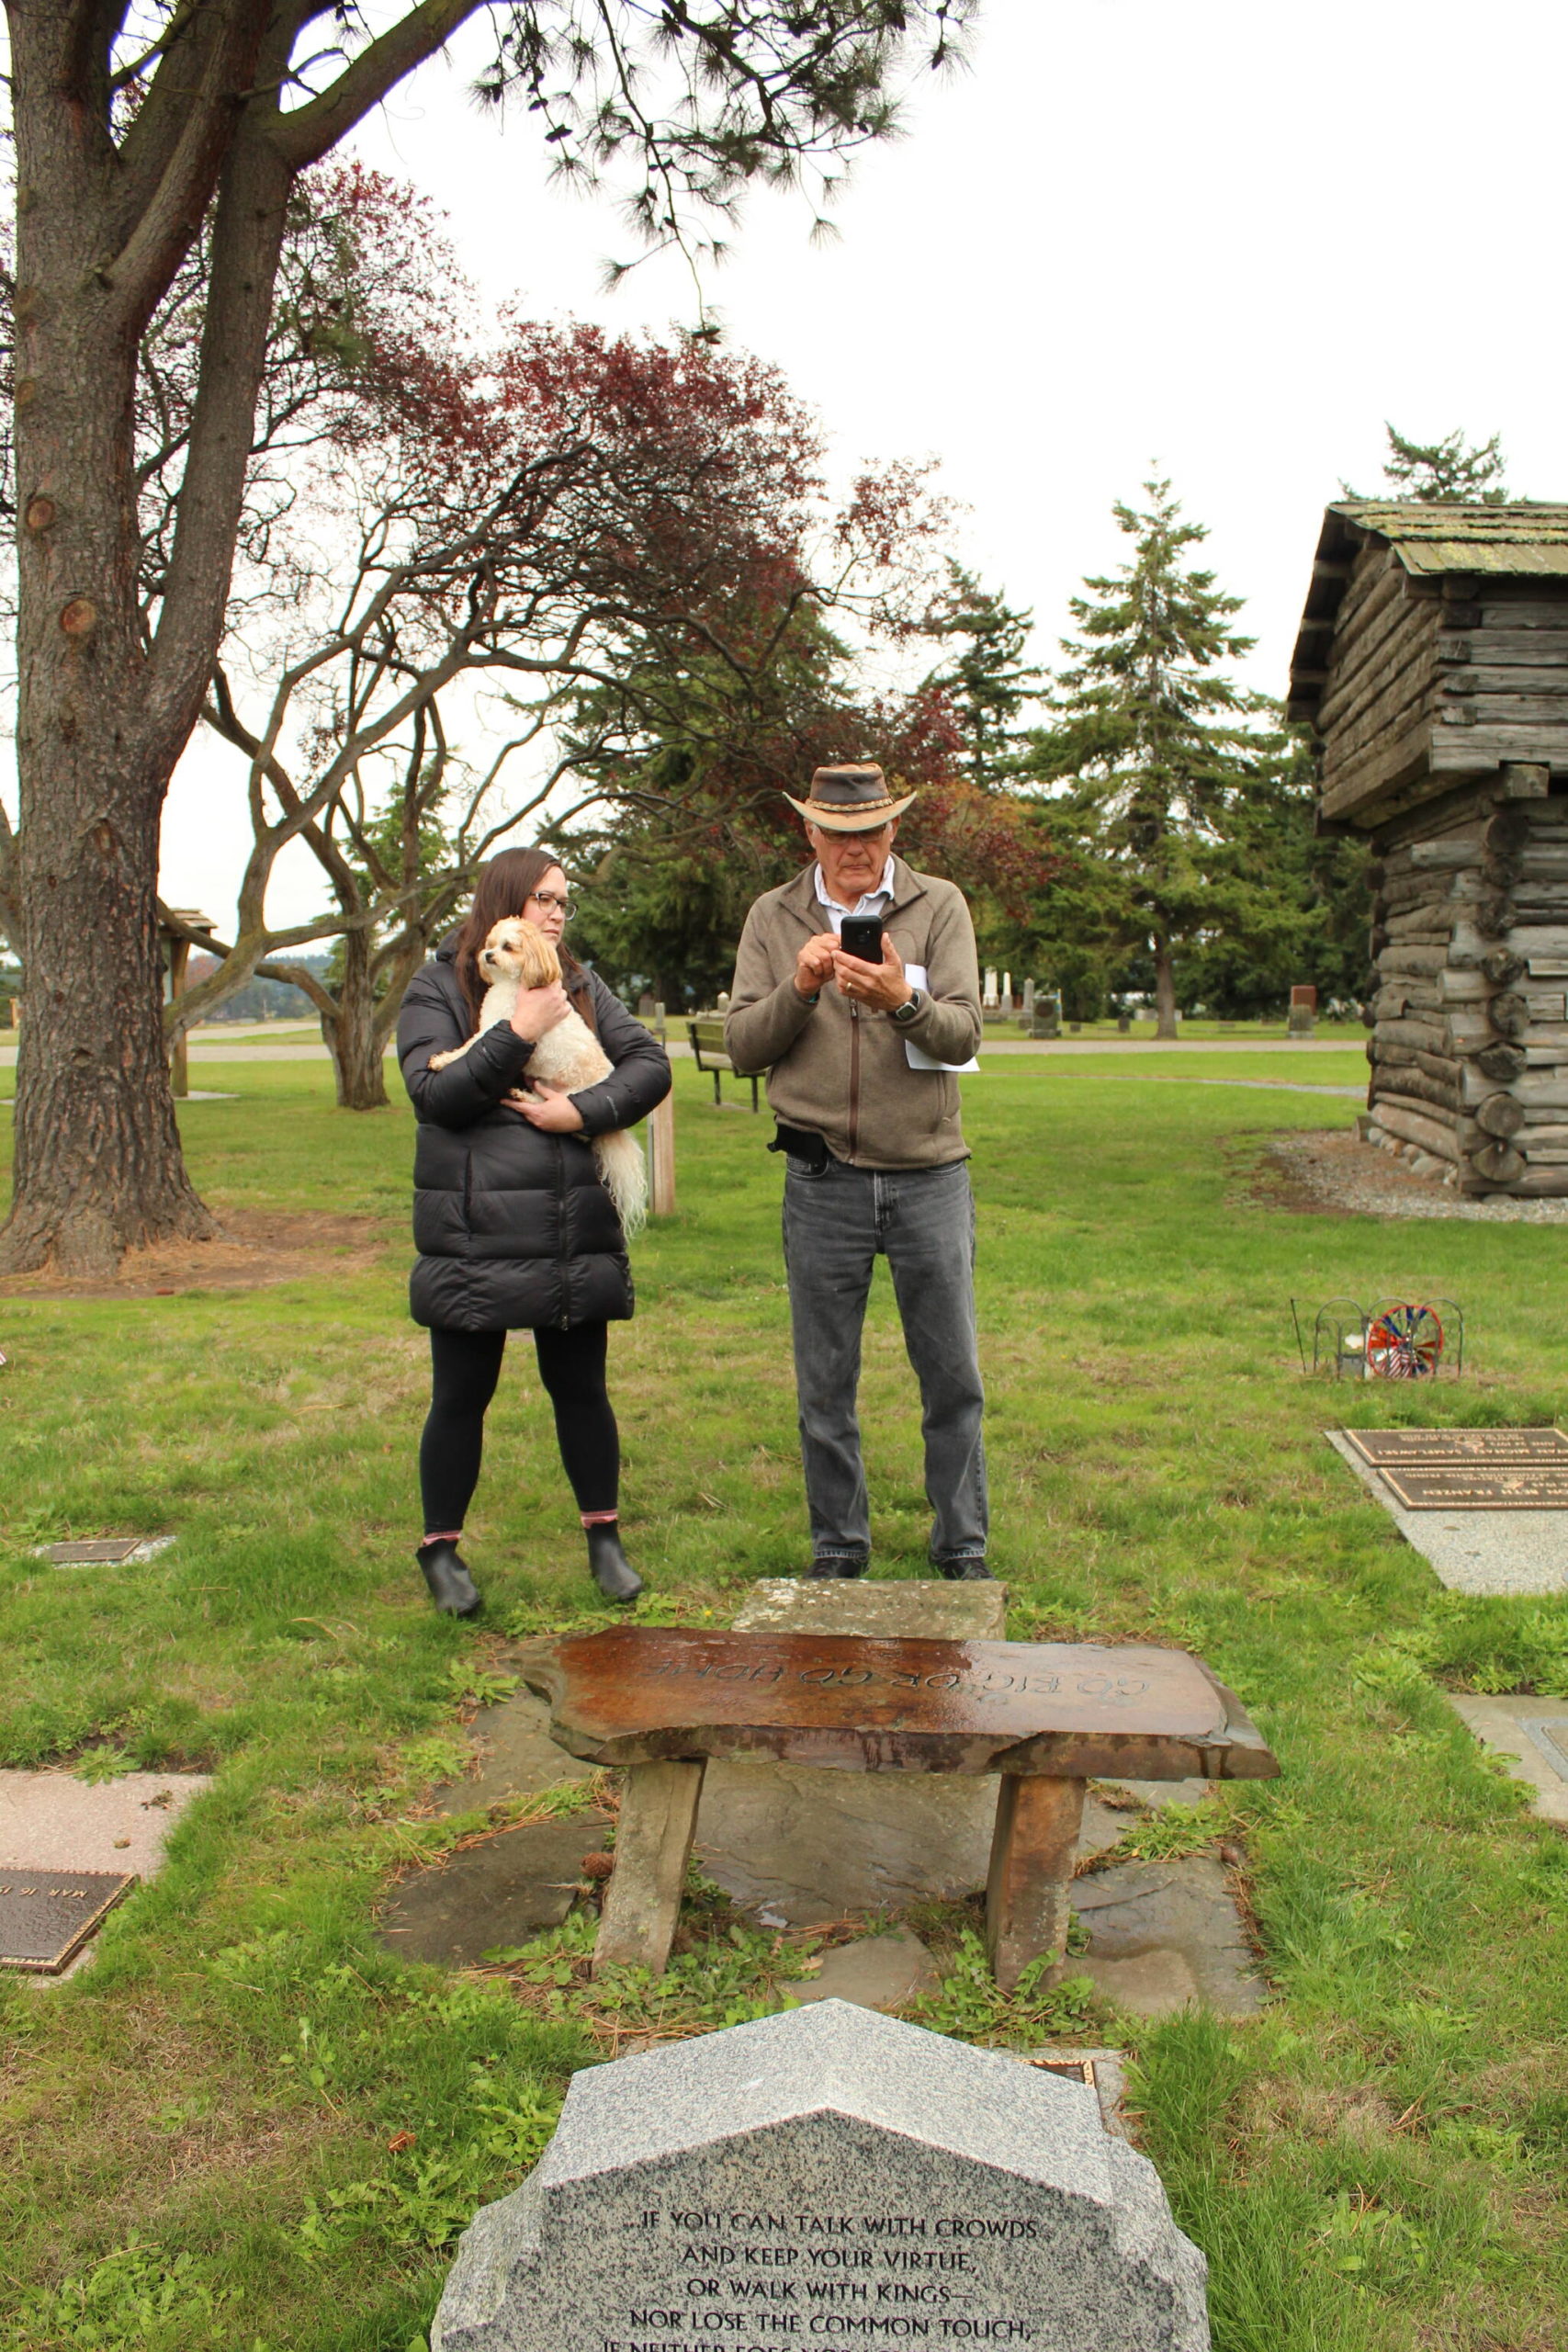 Photo by Karina Andrew/Whidbey News-Times
Laura Foley, left, and Don Meehan find a grave in Sunnyside Cemetery using a GPS locator.